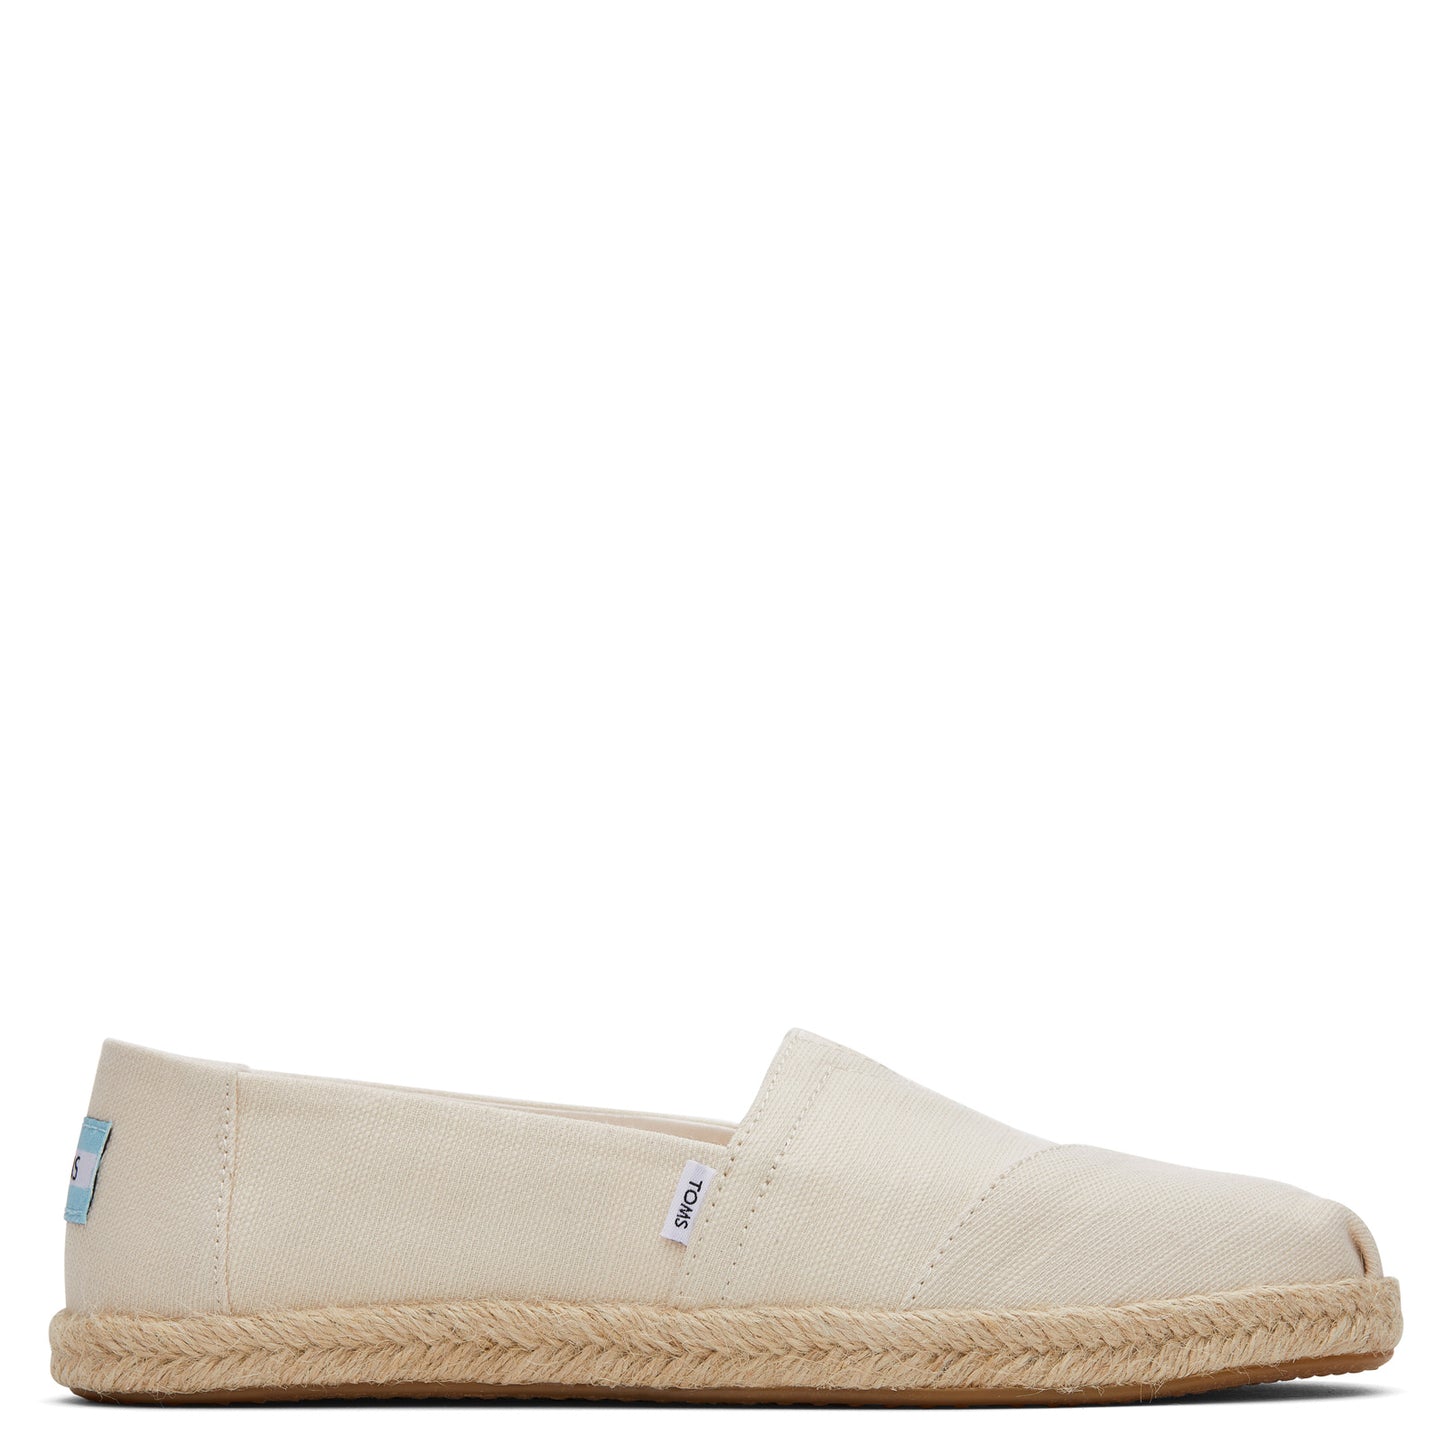 Peltz Shoes  Women's Toms Alpargata Rope Recycled Espadrille Slip-On NATURAL 10019682